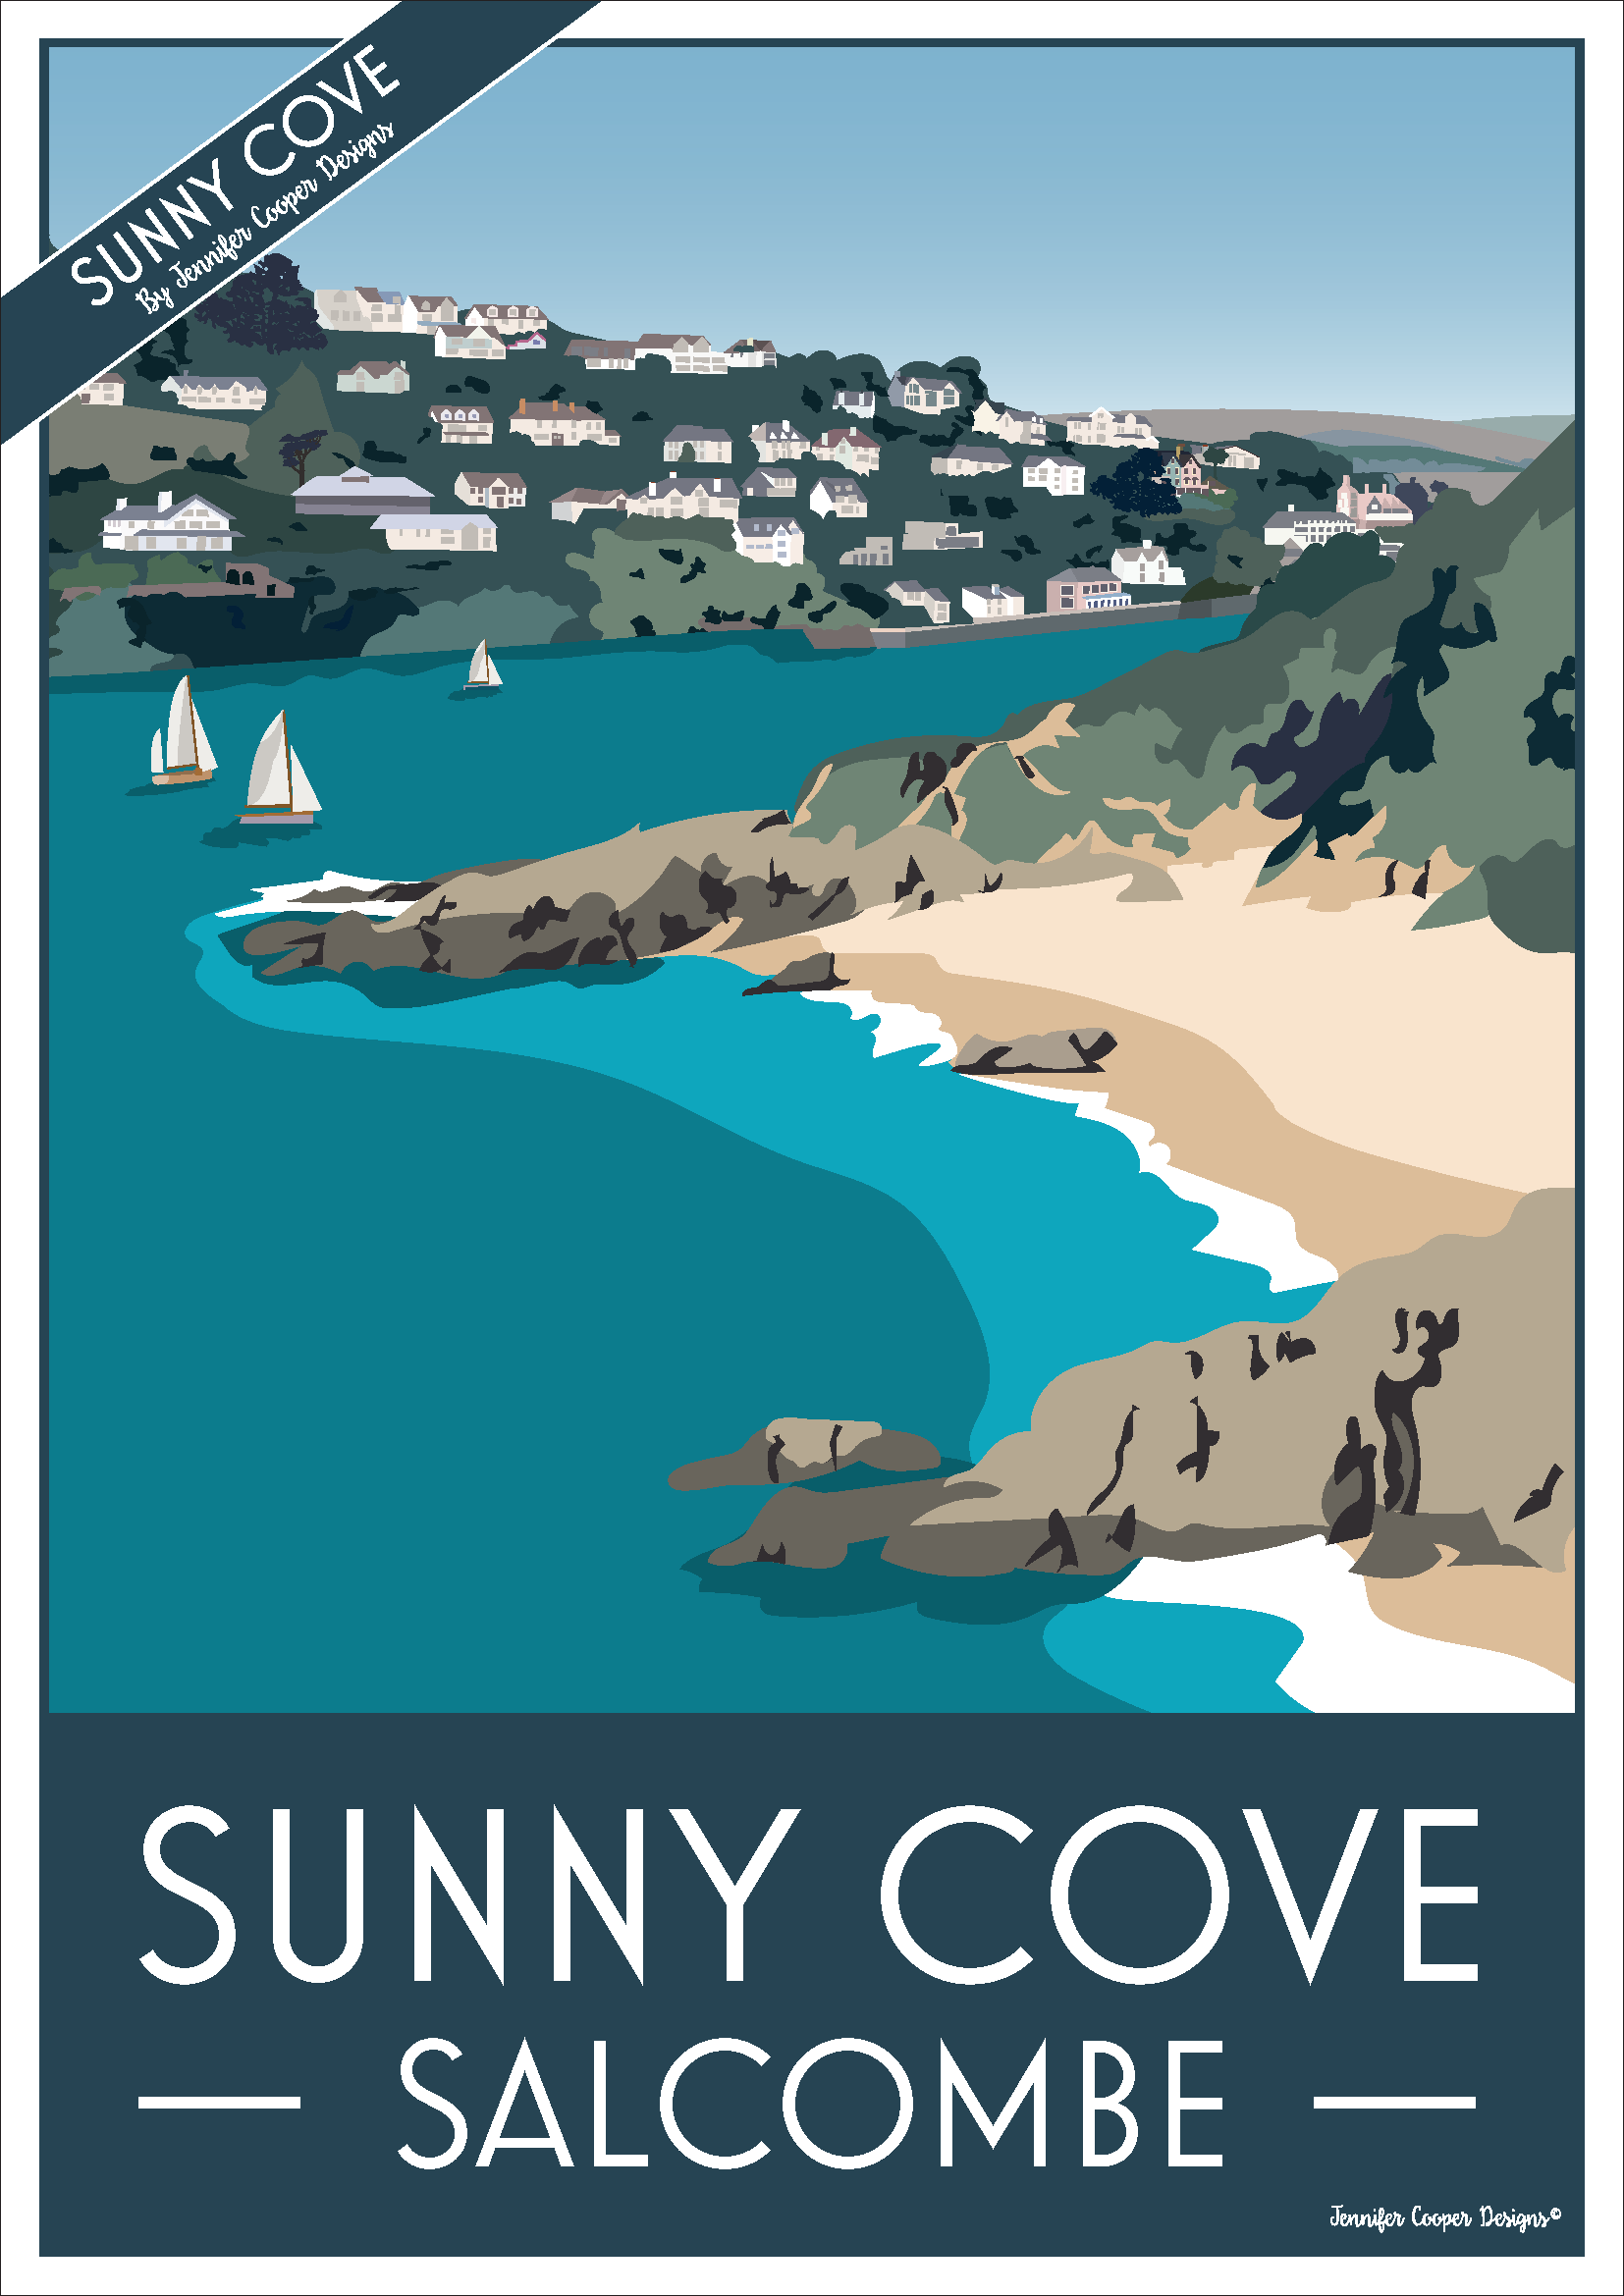 Sunny Cove and Salcombe